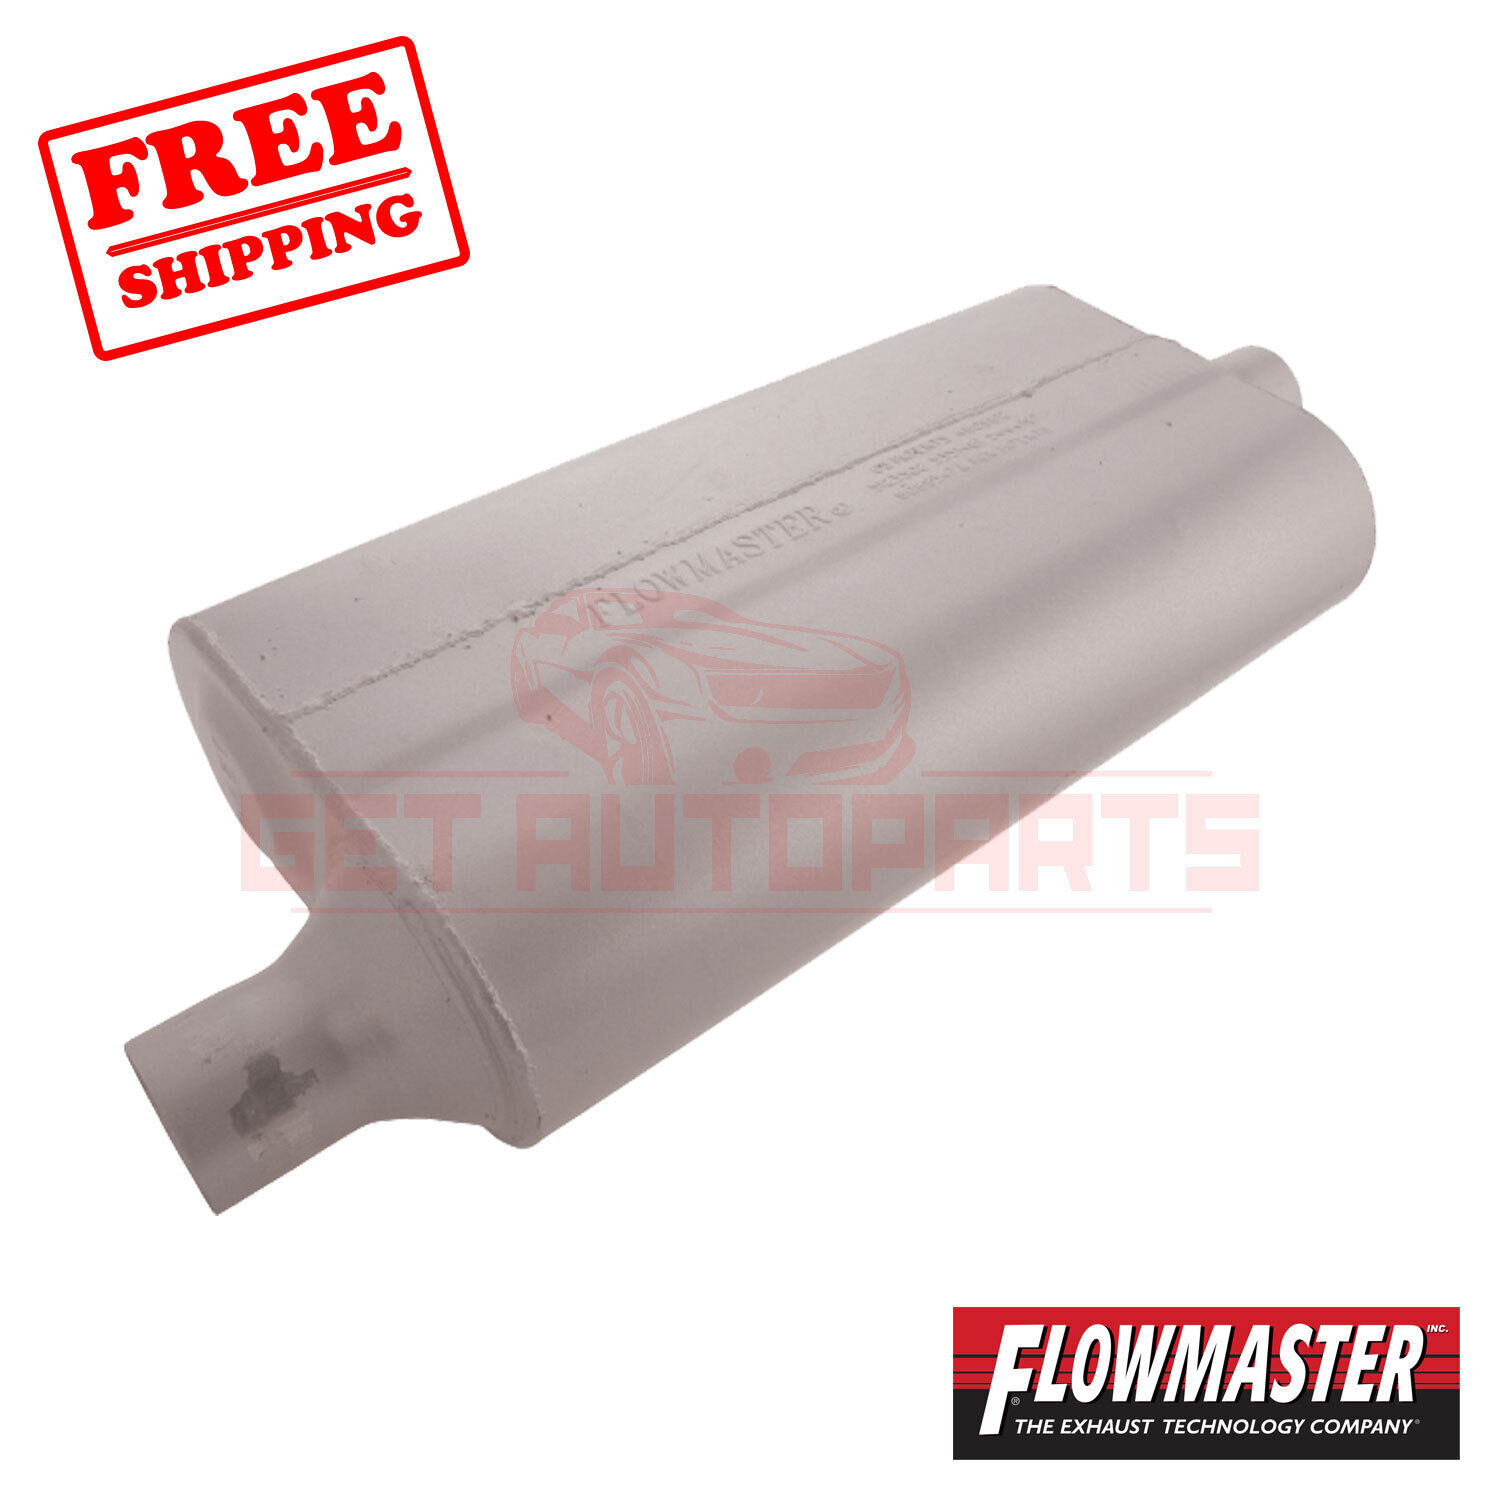 FlowMaster Exhaust Muffler for Plymouth Barracuda 1970-1974